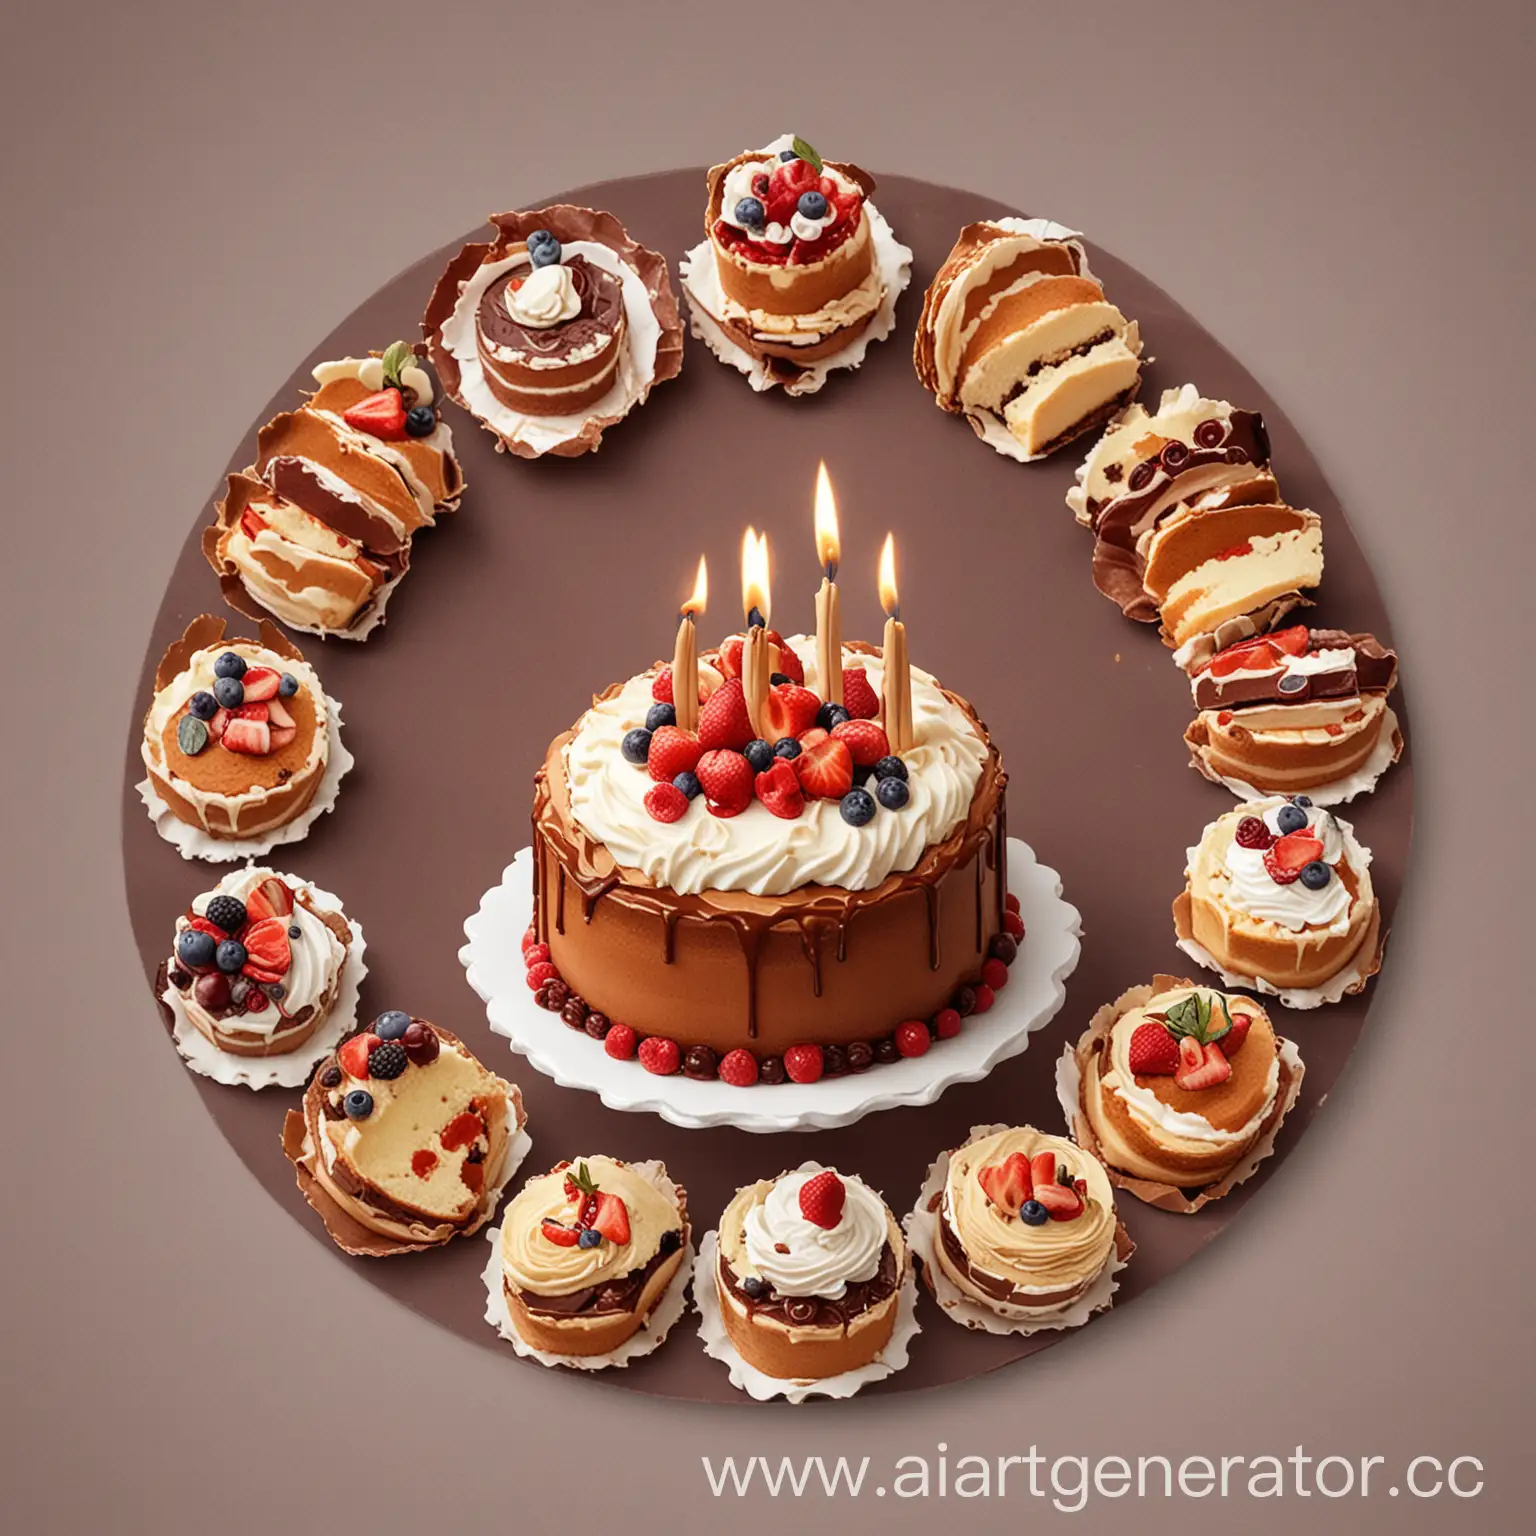 Circular-Avatar-with-Cake-and-Recipes-Baking-Inspiration-in-a-Round-Frame